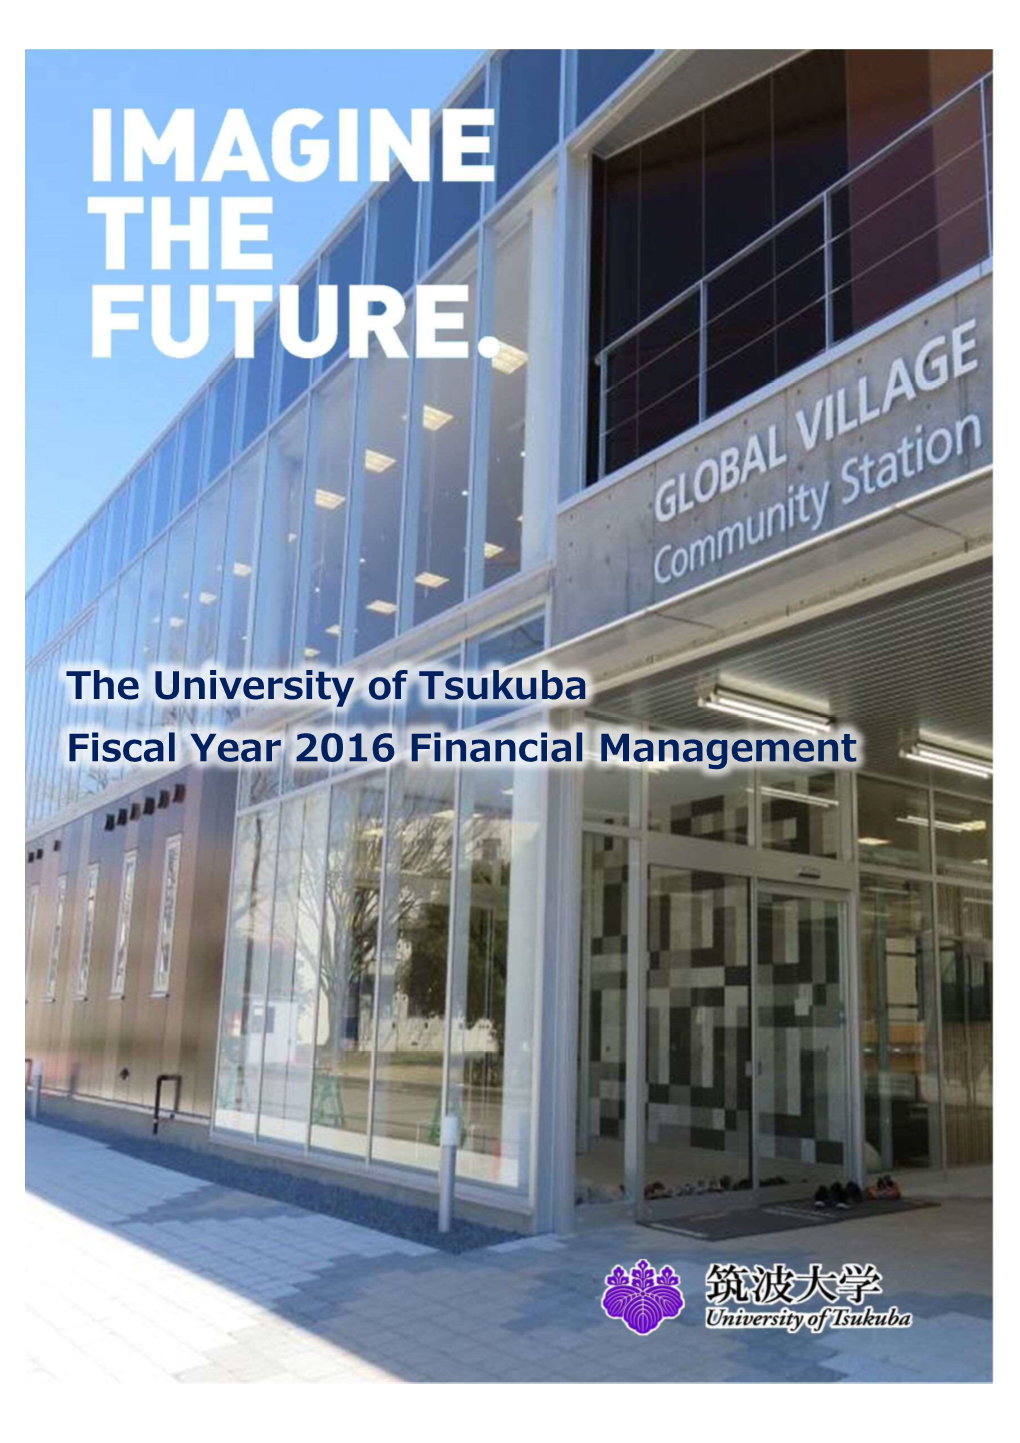 The University of Tsukuba Fiscal Year 2016 Financial Management Message from the President